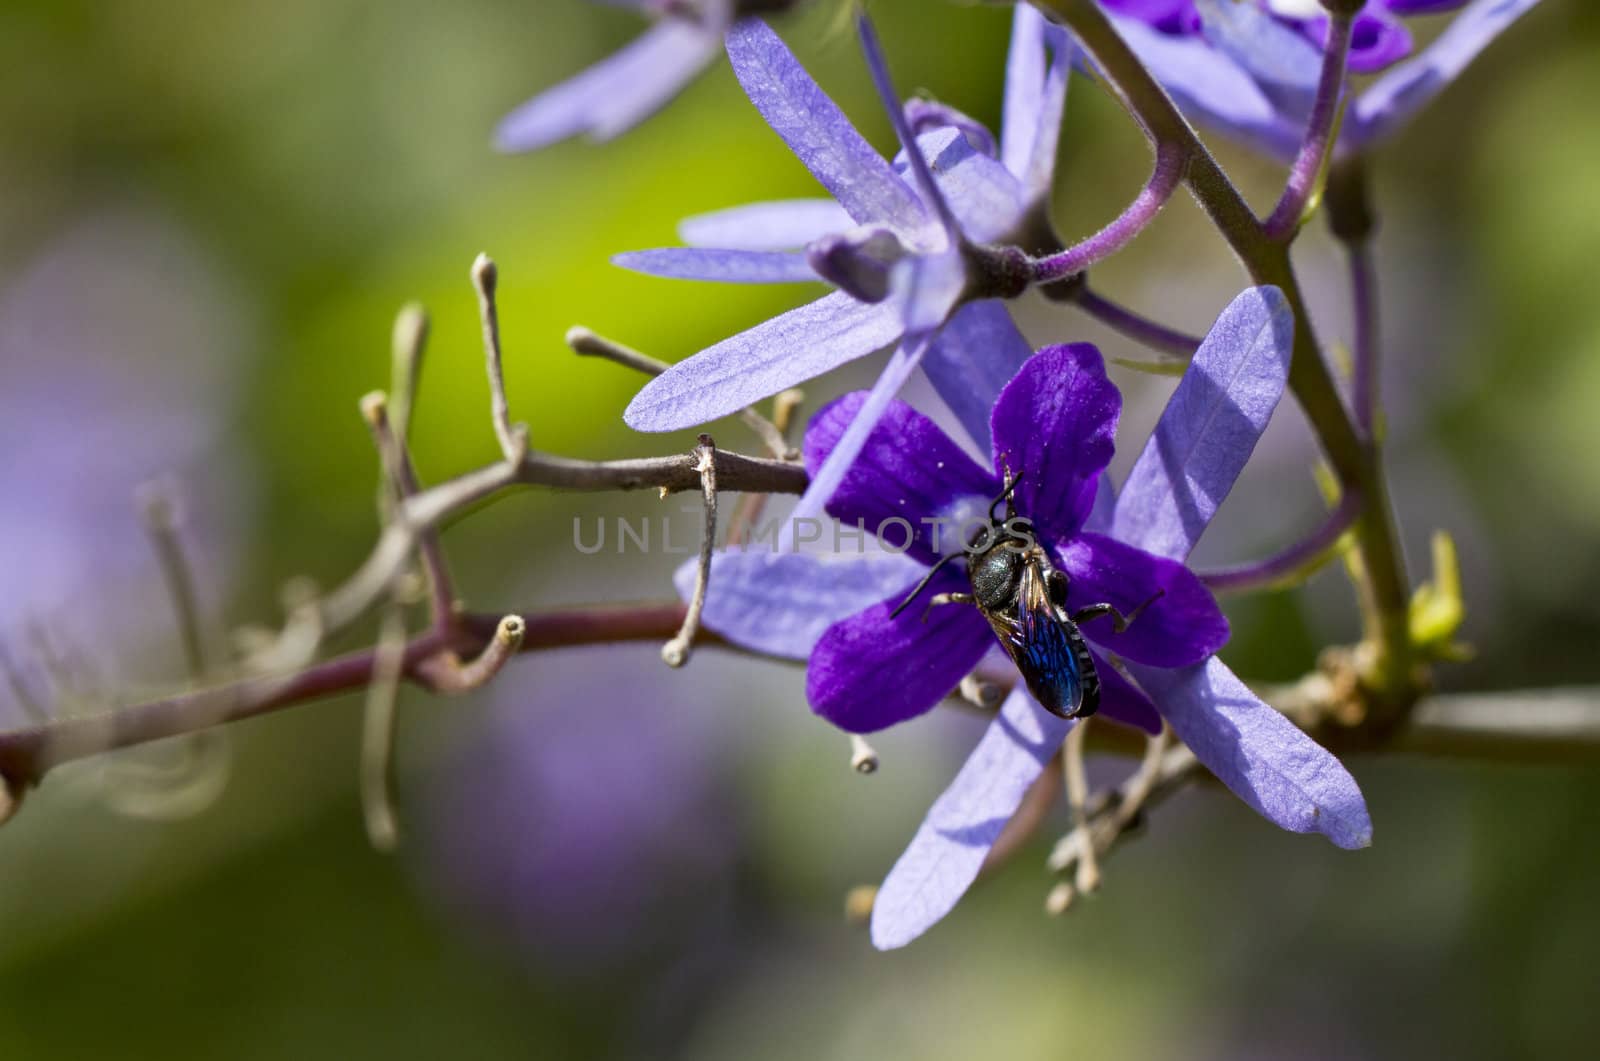 black wasp resting on th epetals of purple flowers in the morning light